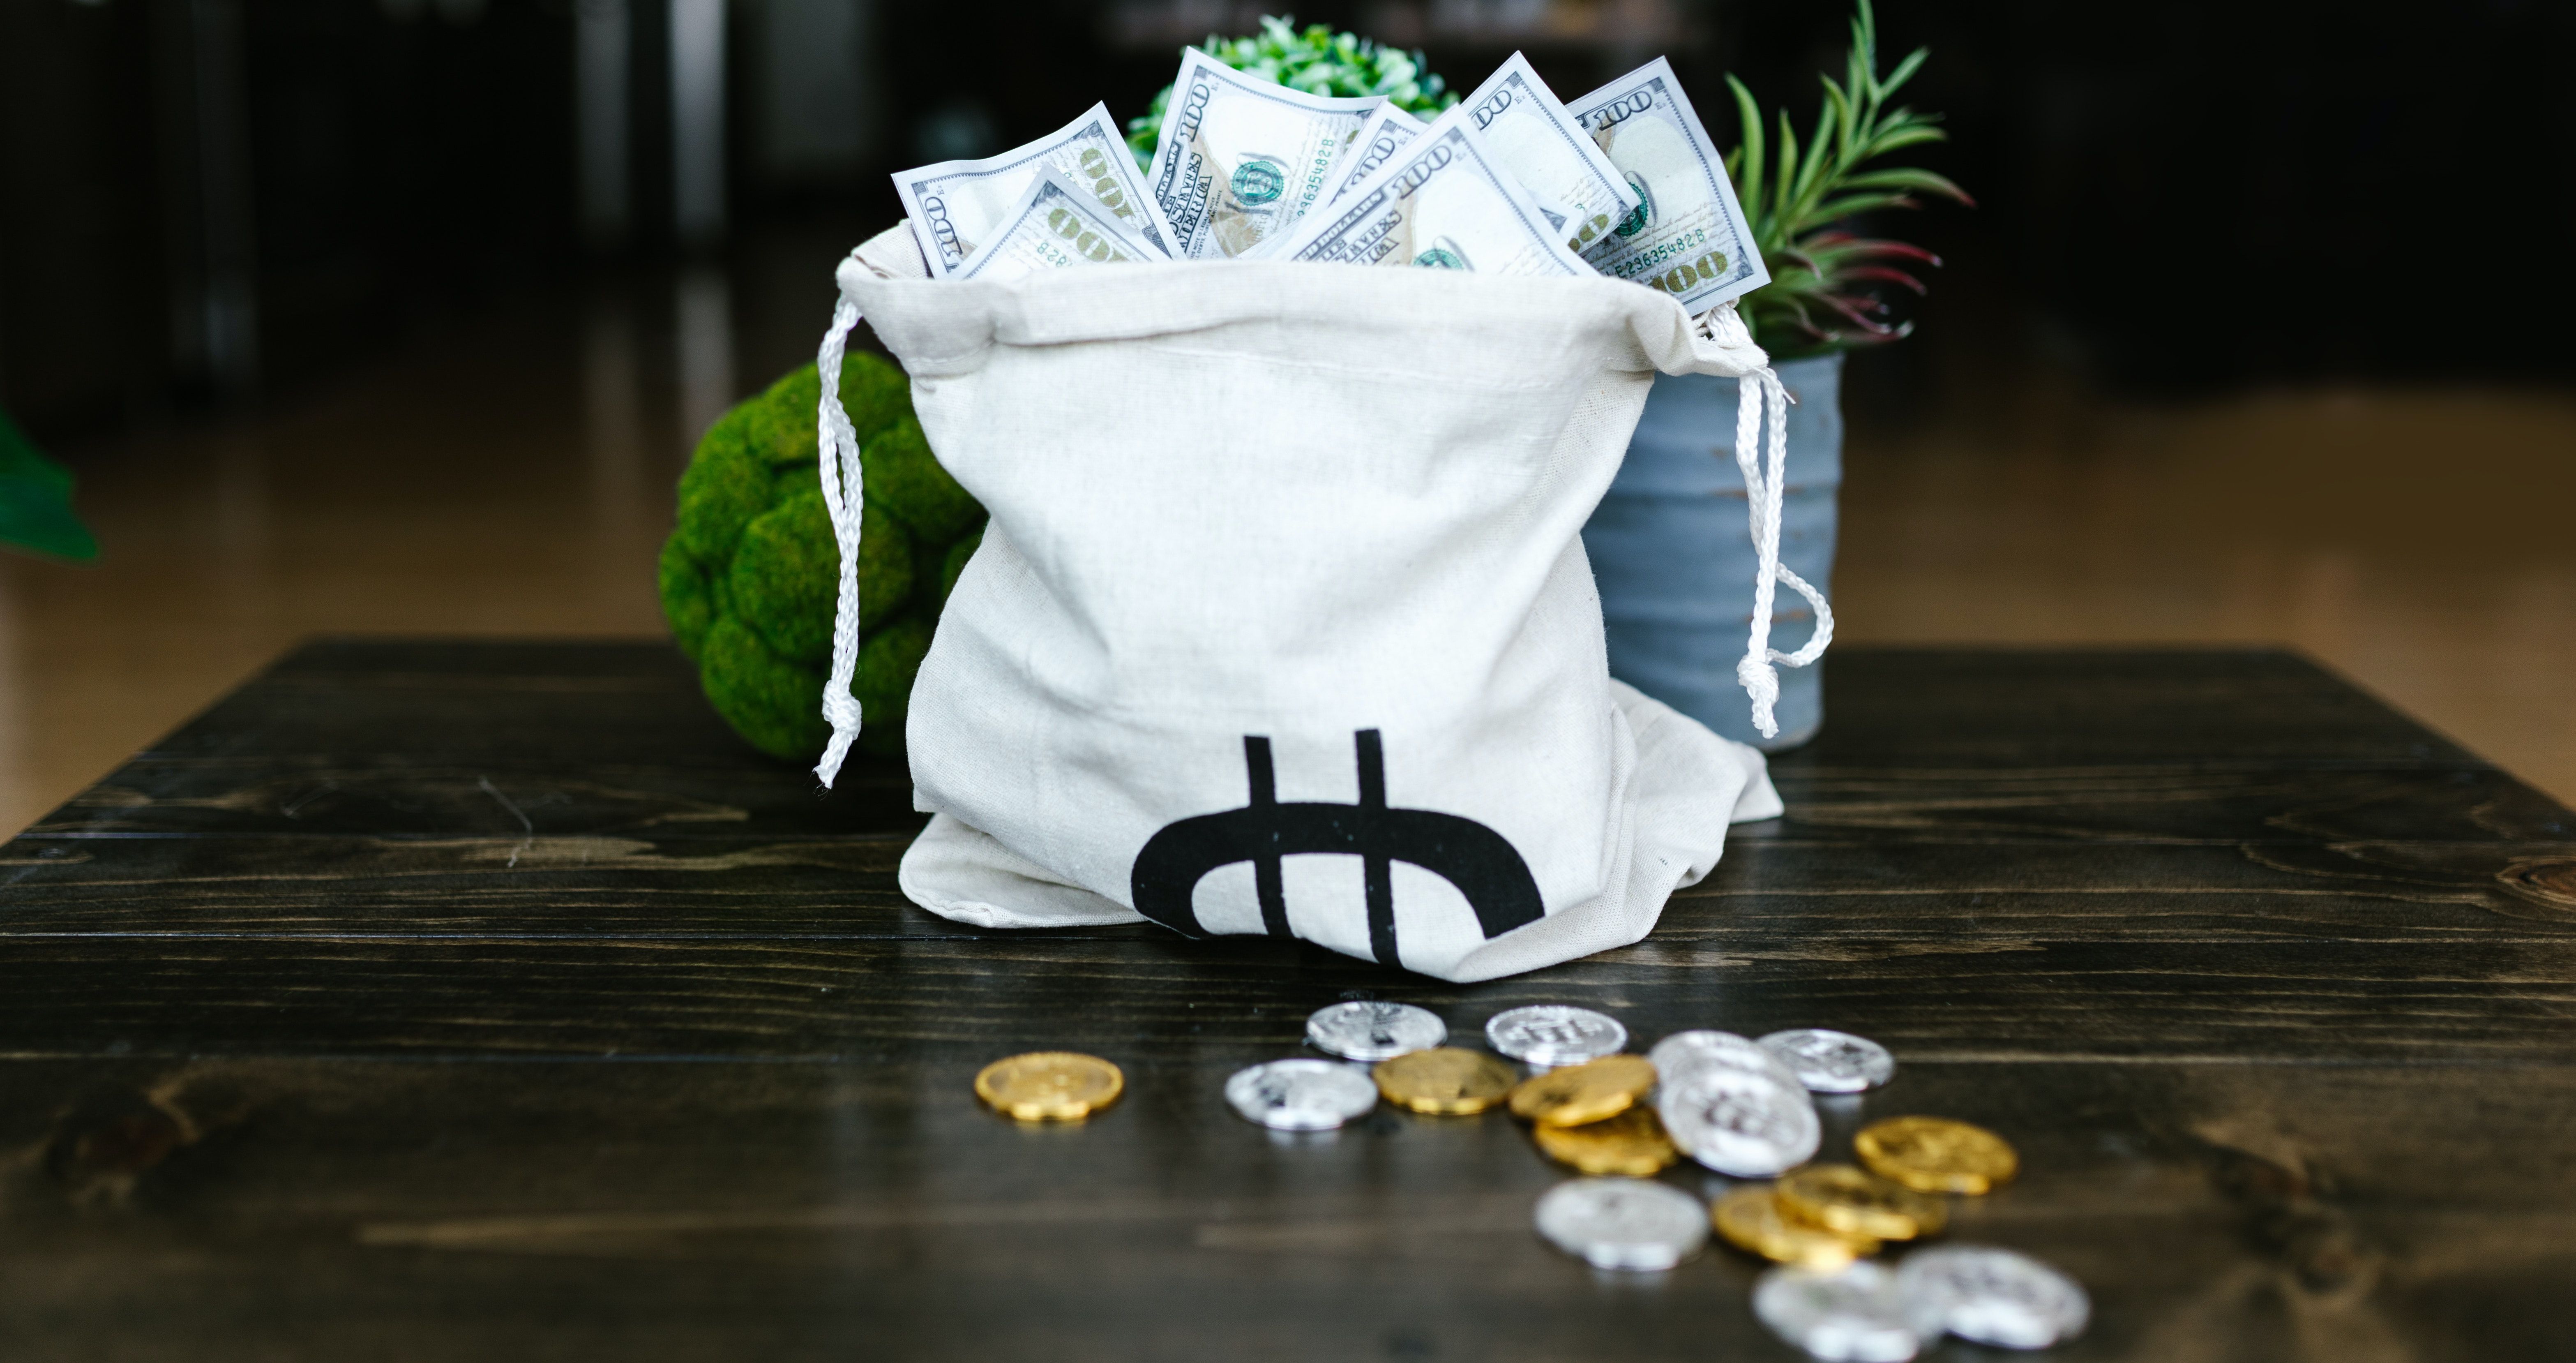 cash in bag next to crypto coins